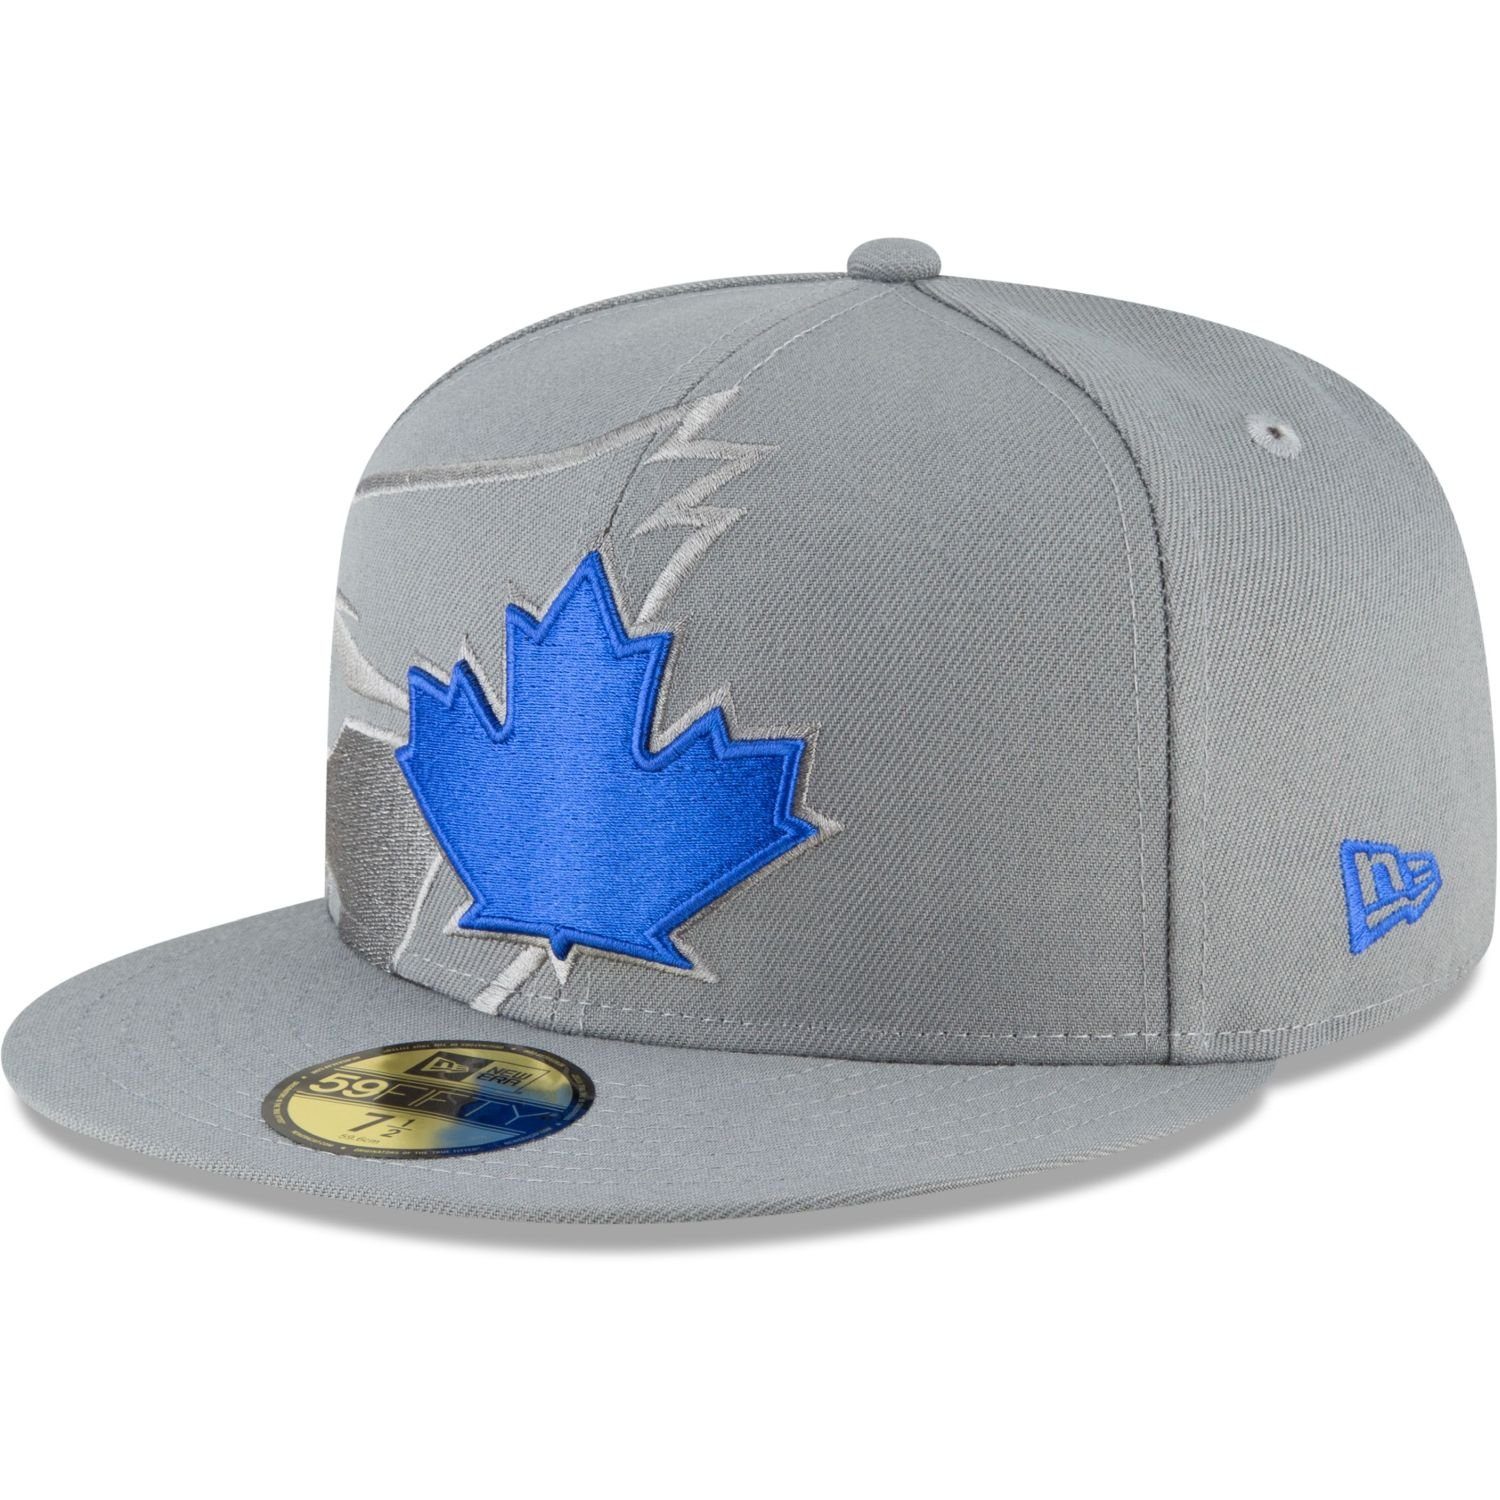 New Era Fitted Cap 59Fifty STORM GREY MLB Cooperstown Team Toronto Blue Jays